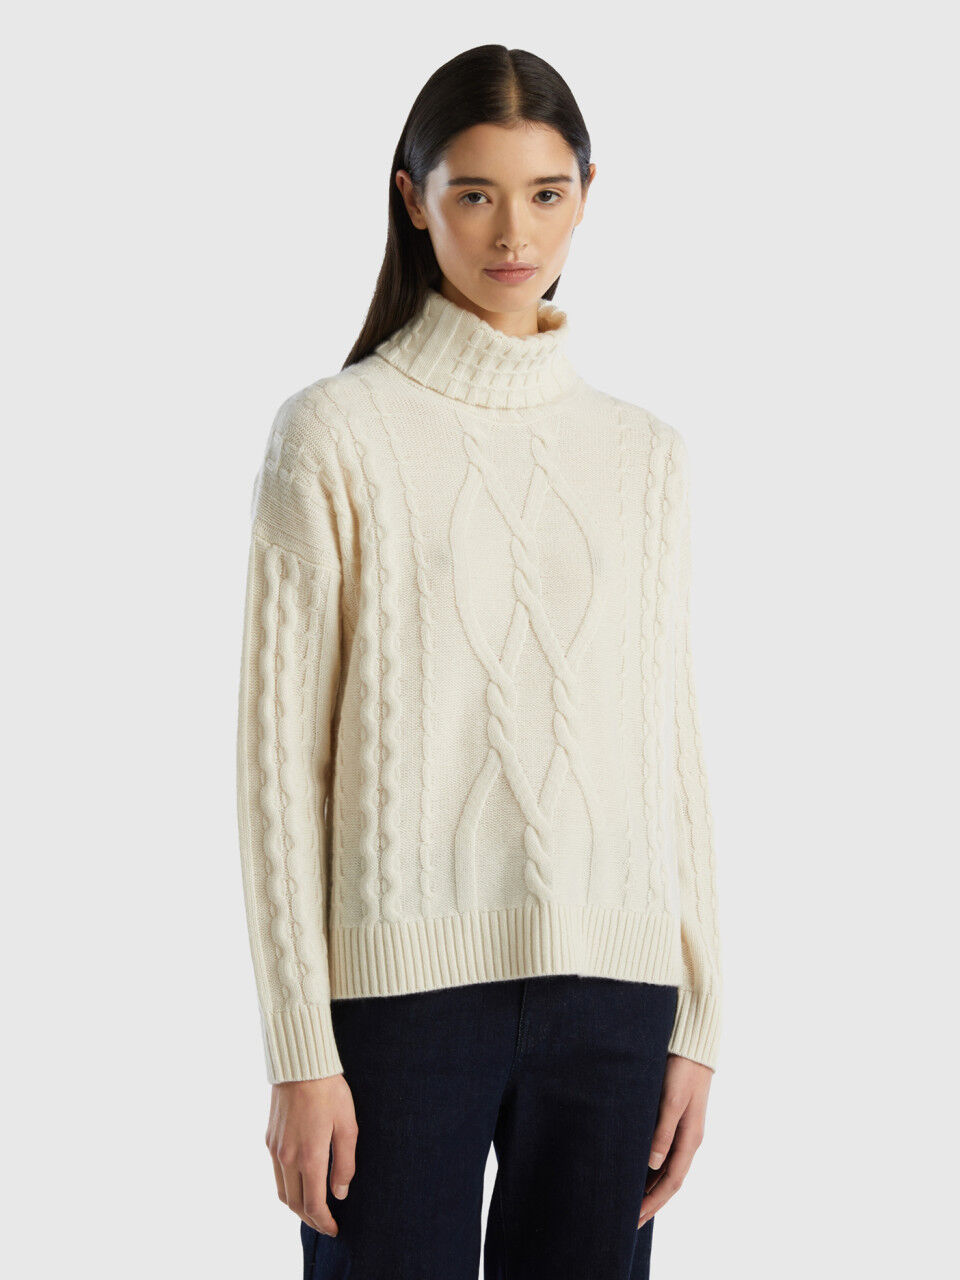 Women's Iconic Cashmere Knitwear Collection 2024 | Benetton